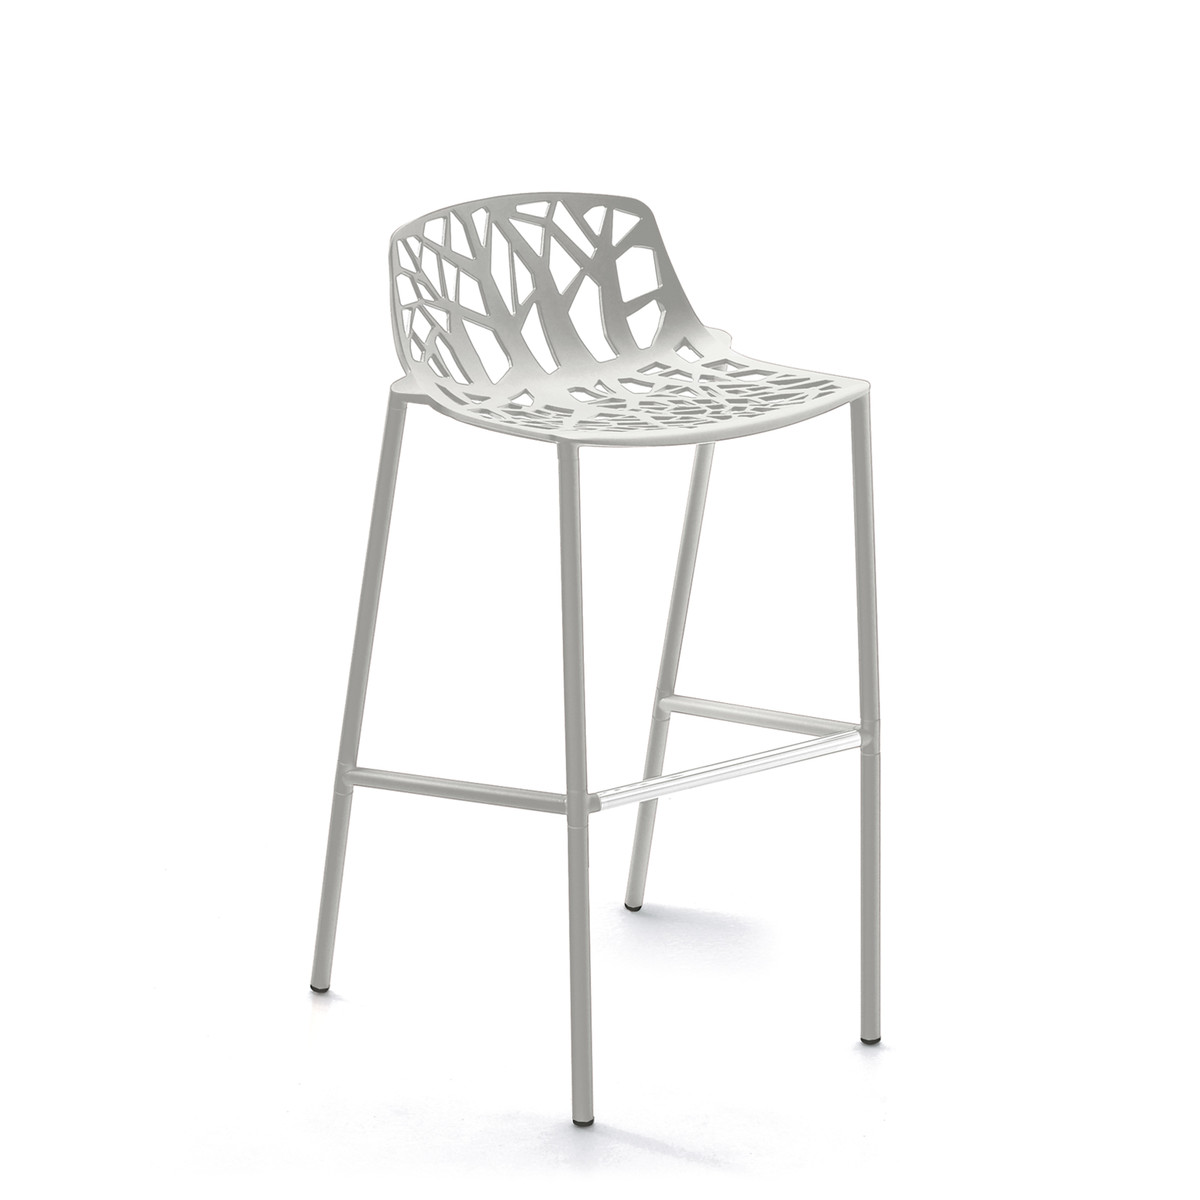 Fast - Forest Bar Stool with Low Backrest